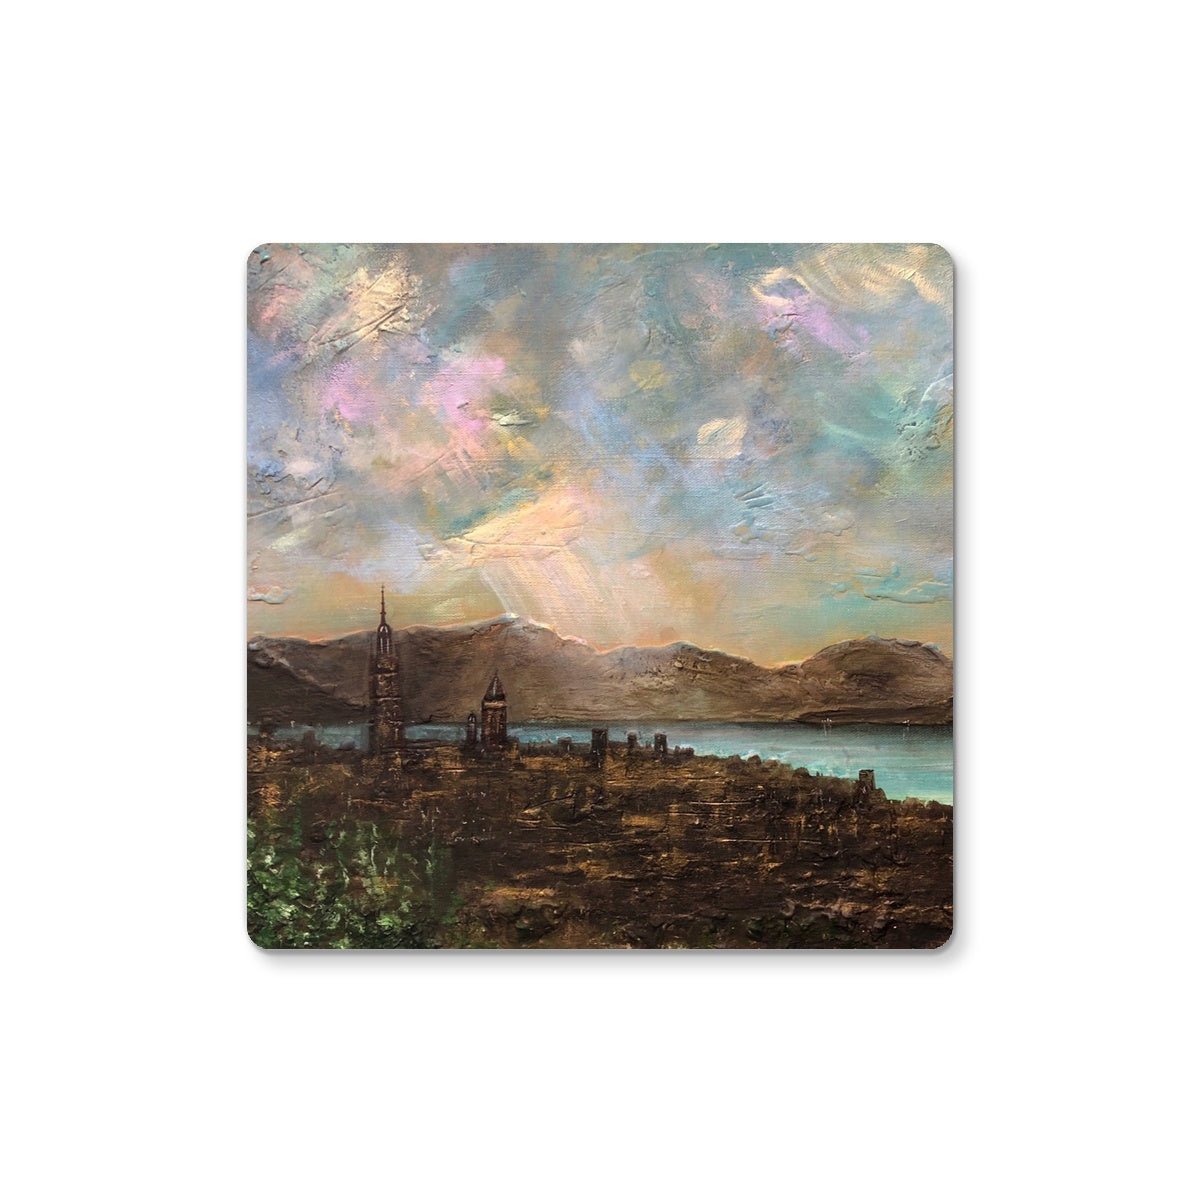 Angels Fingers Over Greenock Art Gifts Coaster-Coasters-River Clyde Art Gallery-2 Coasters-Paintings, Prints, Homeware, Art Gifts From Scotland By Scottish Artist Kevin Hunter